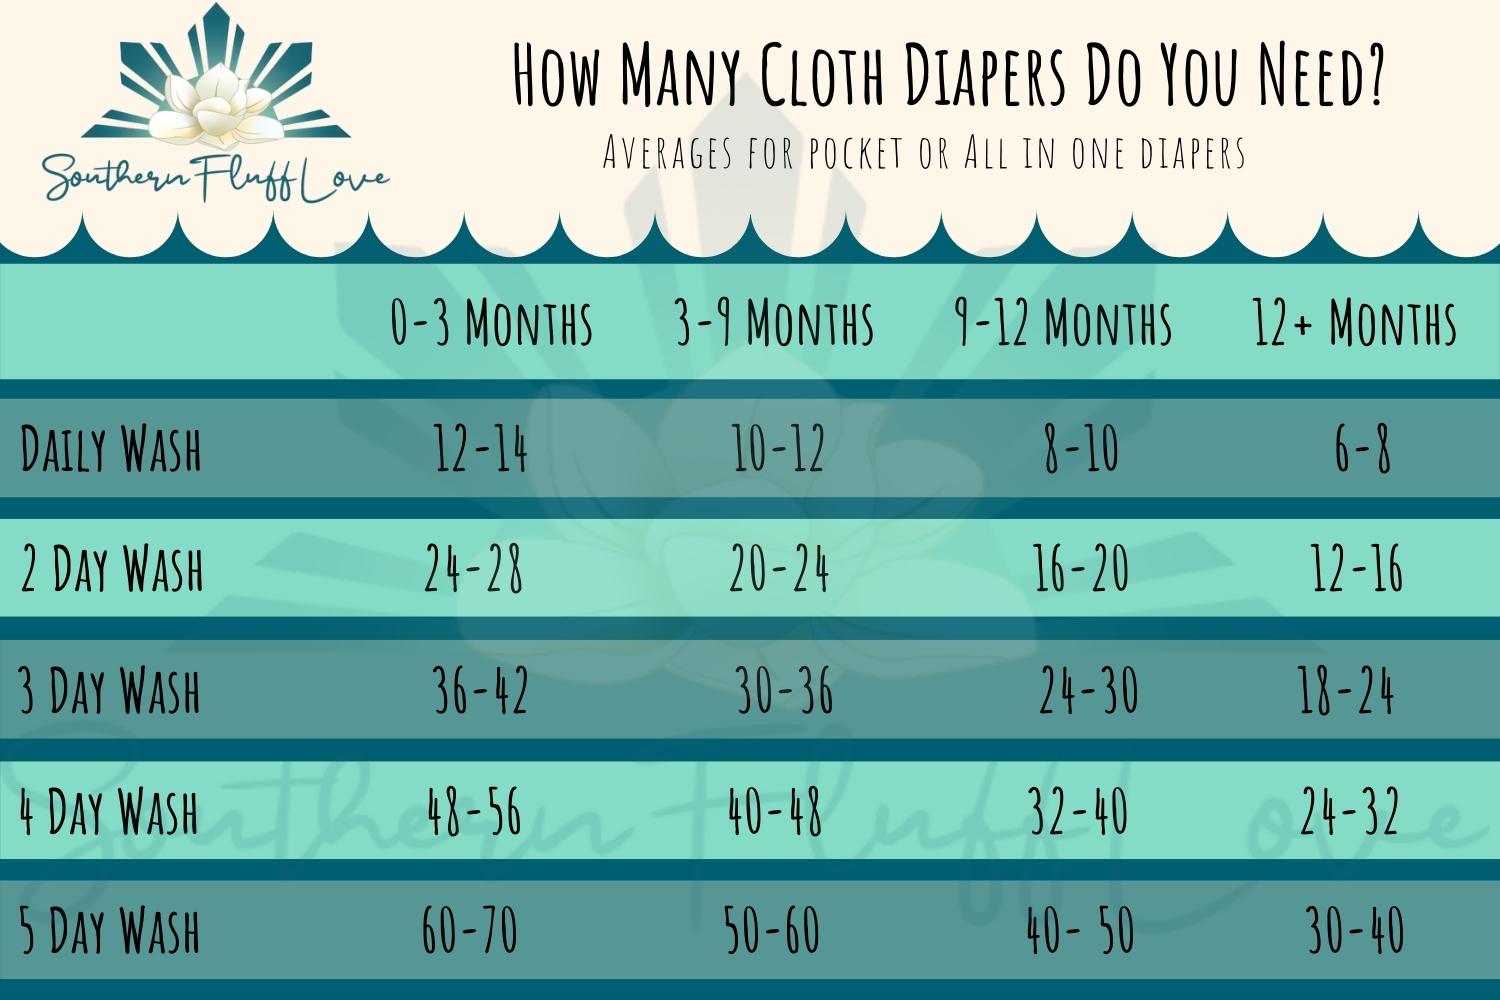 Cloth Diapers Needed Per Day